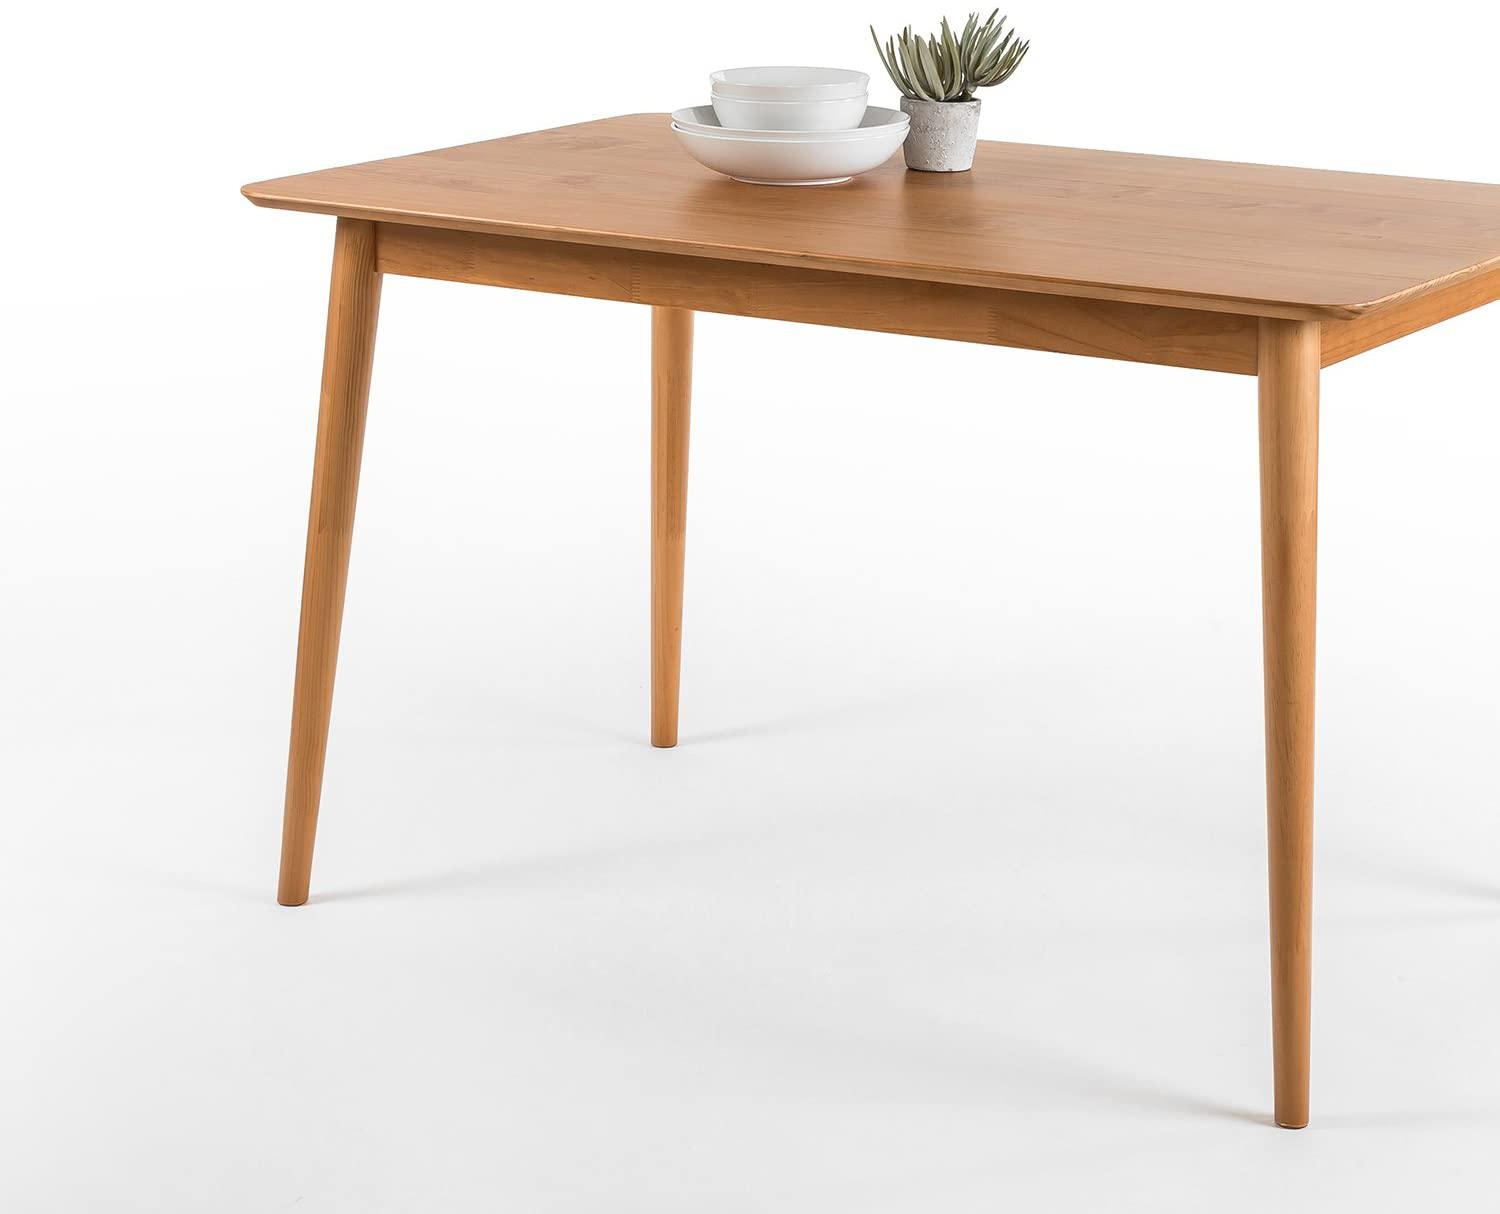  ZINUS Jen 47 Inch Wood Dining Table / Solid Wood ...